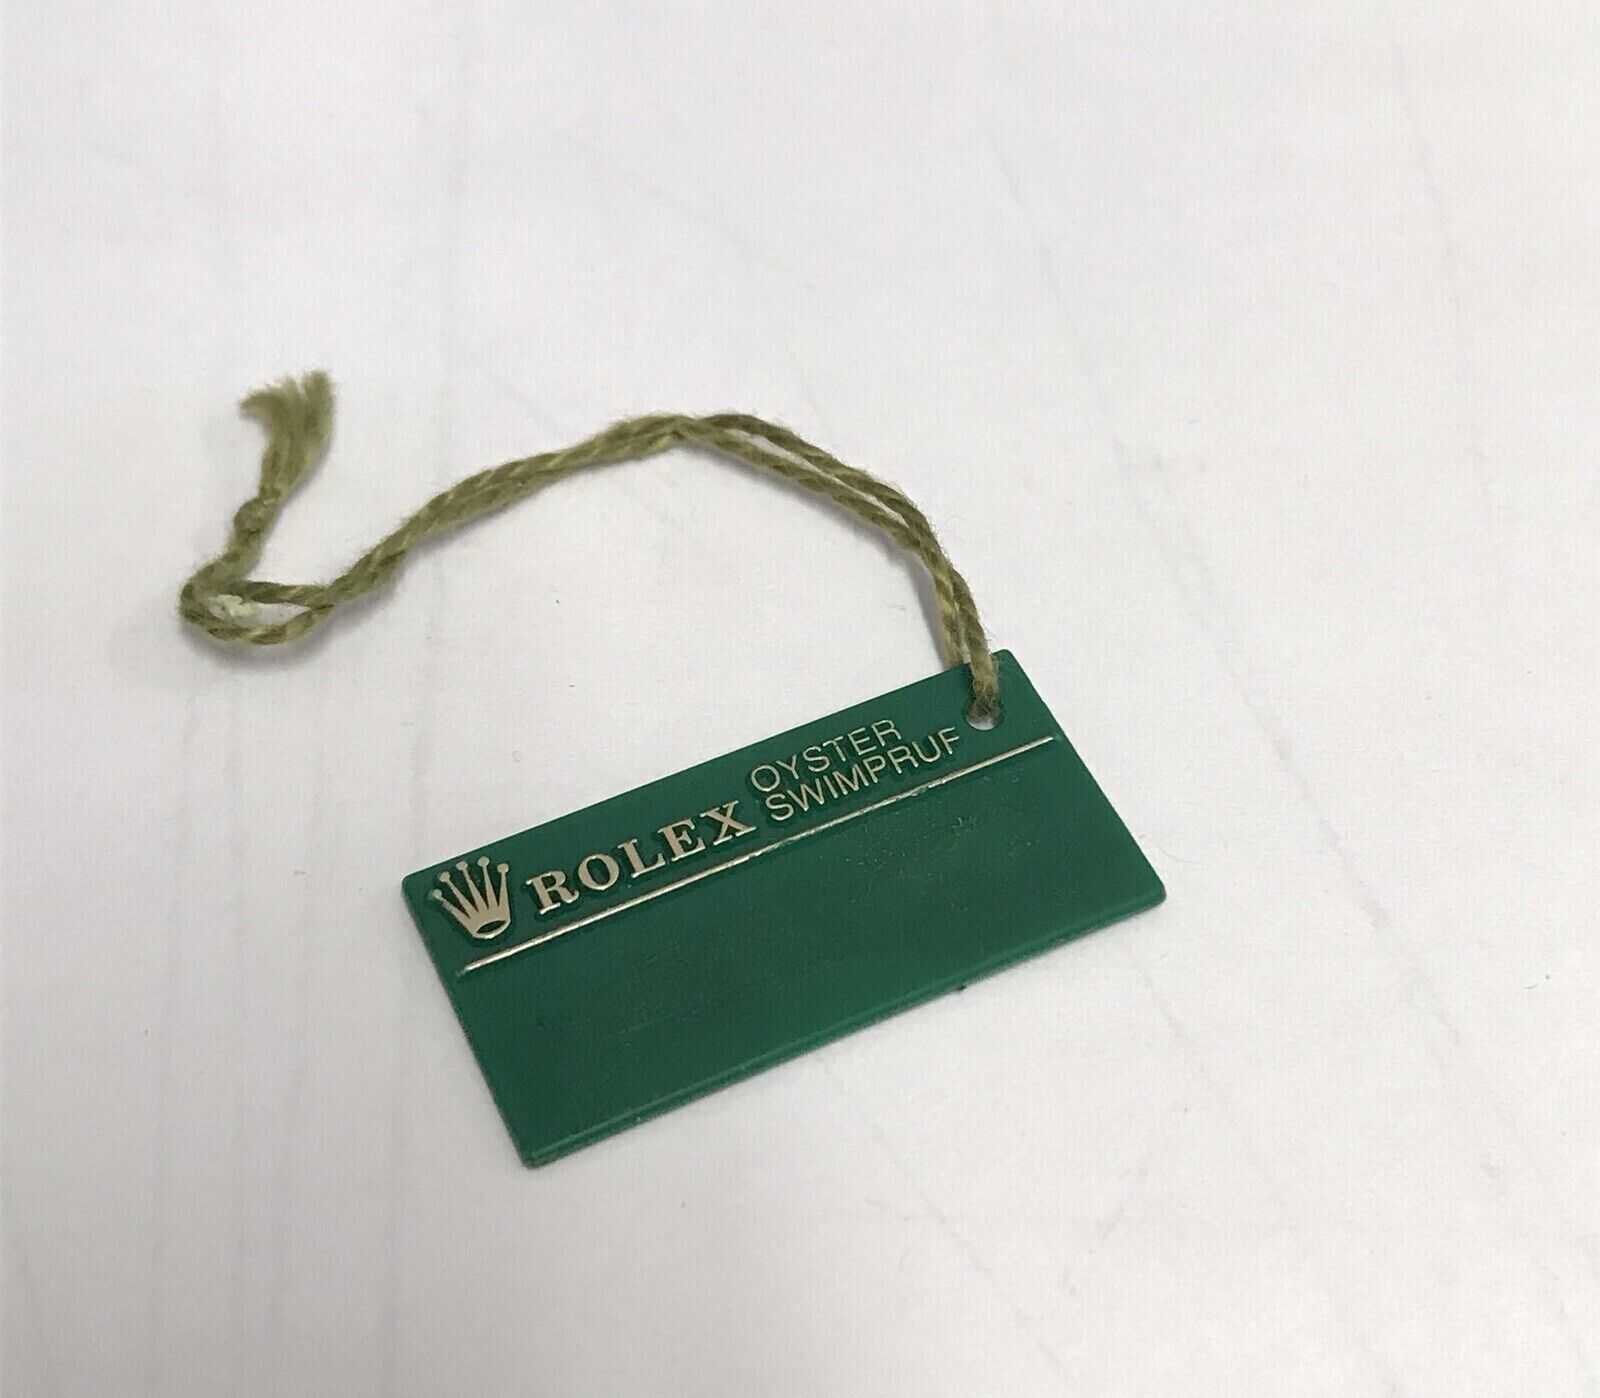 ROLEX Vintage Green Tag Hangtag Oyster Swimpruf P708574 Air King AIRKING 14000